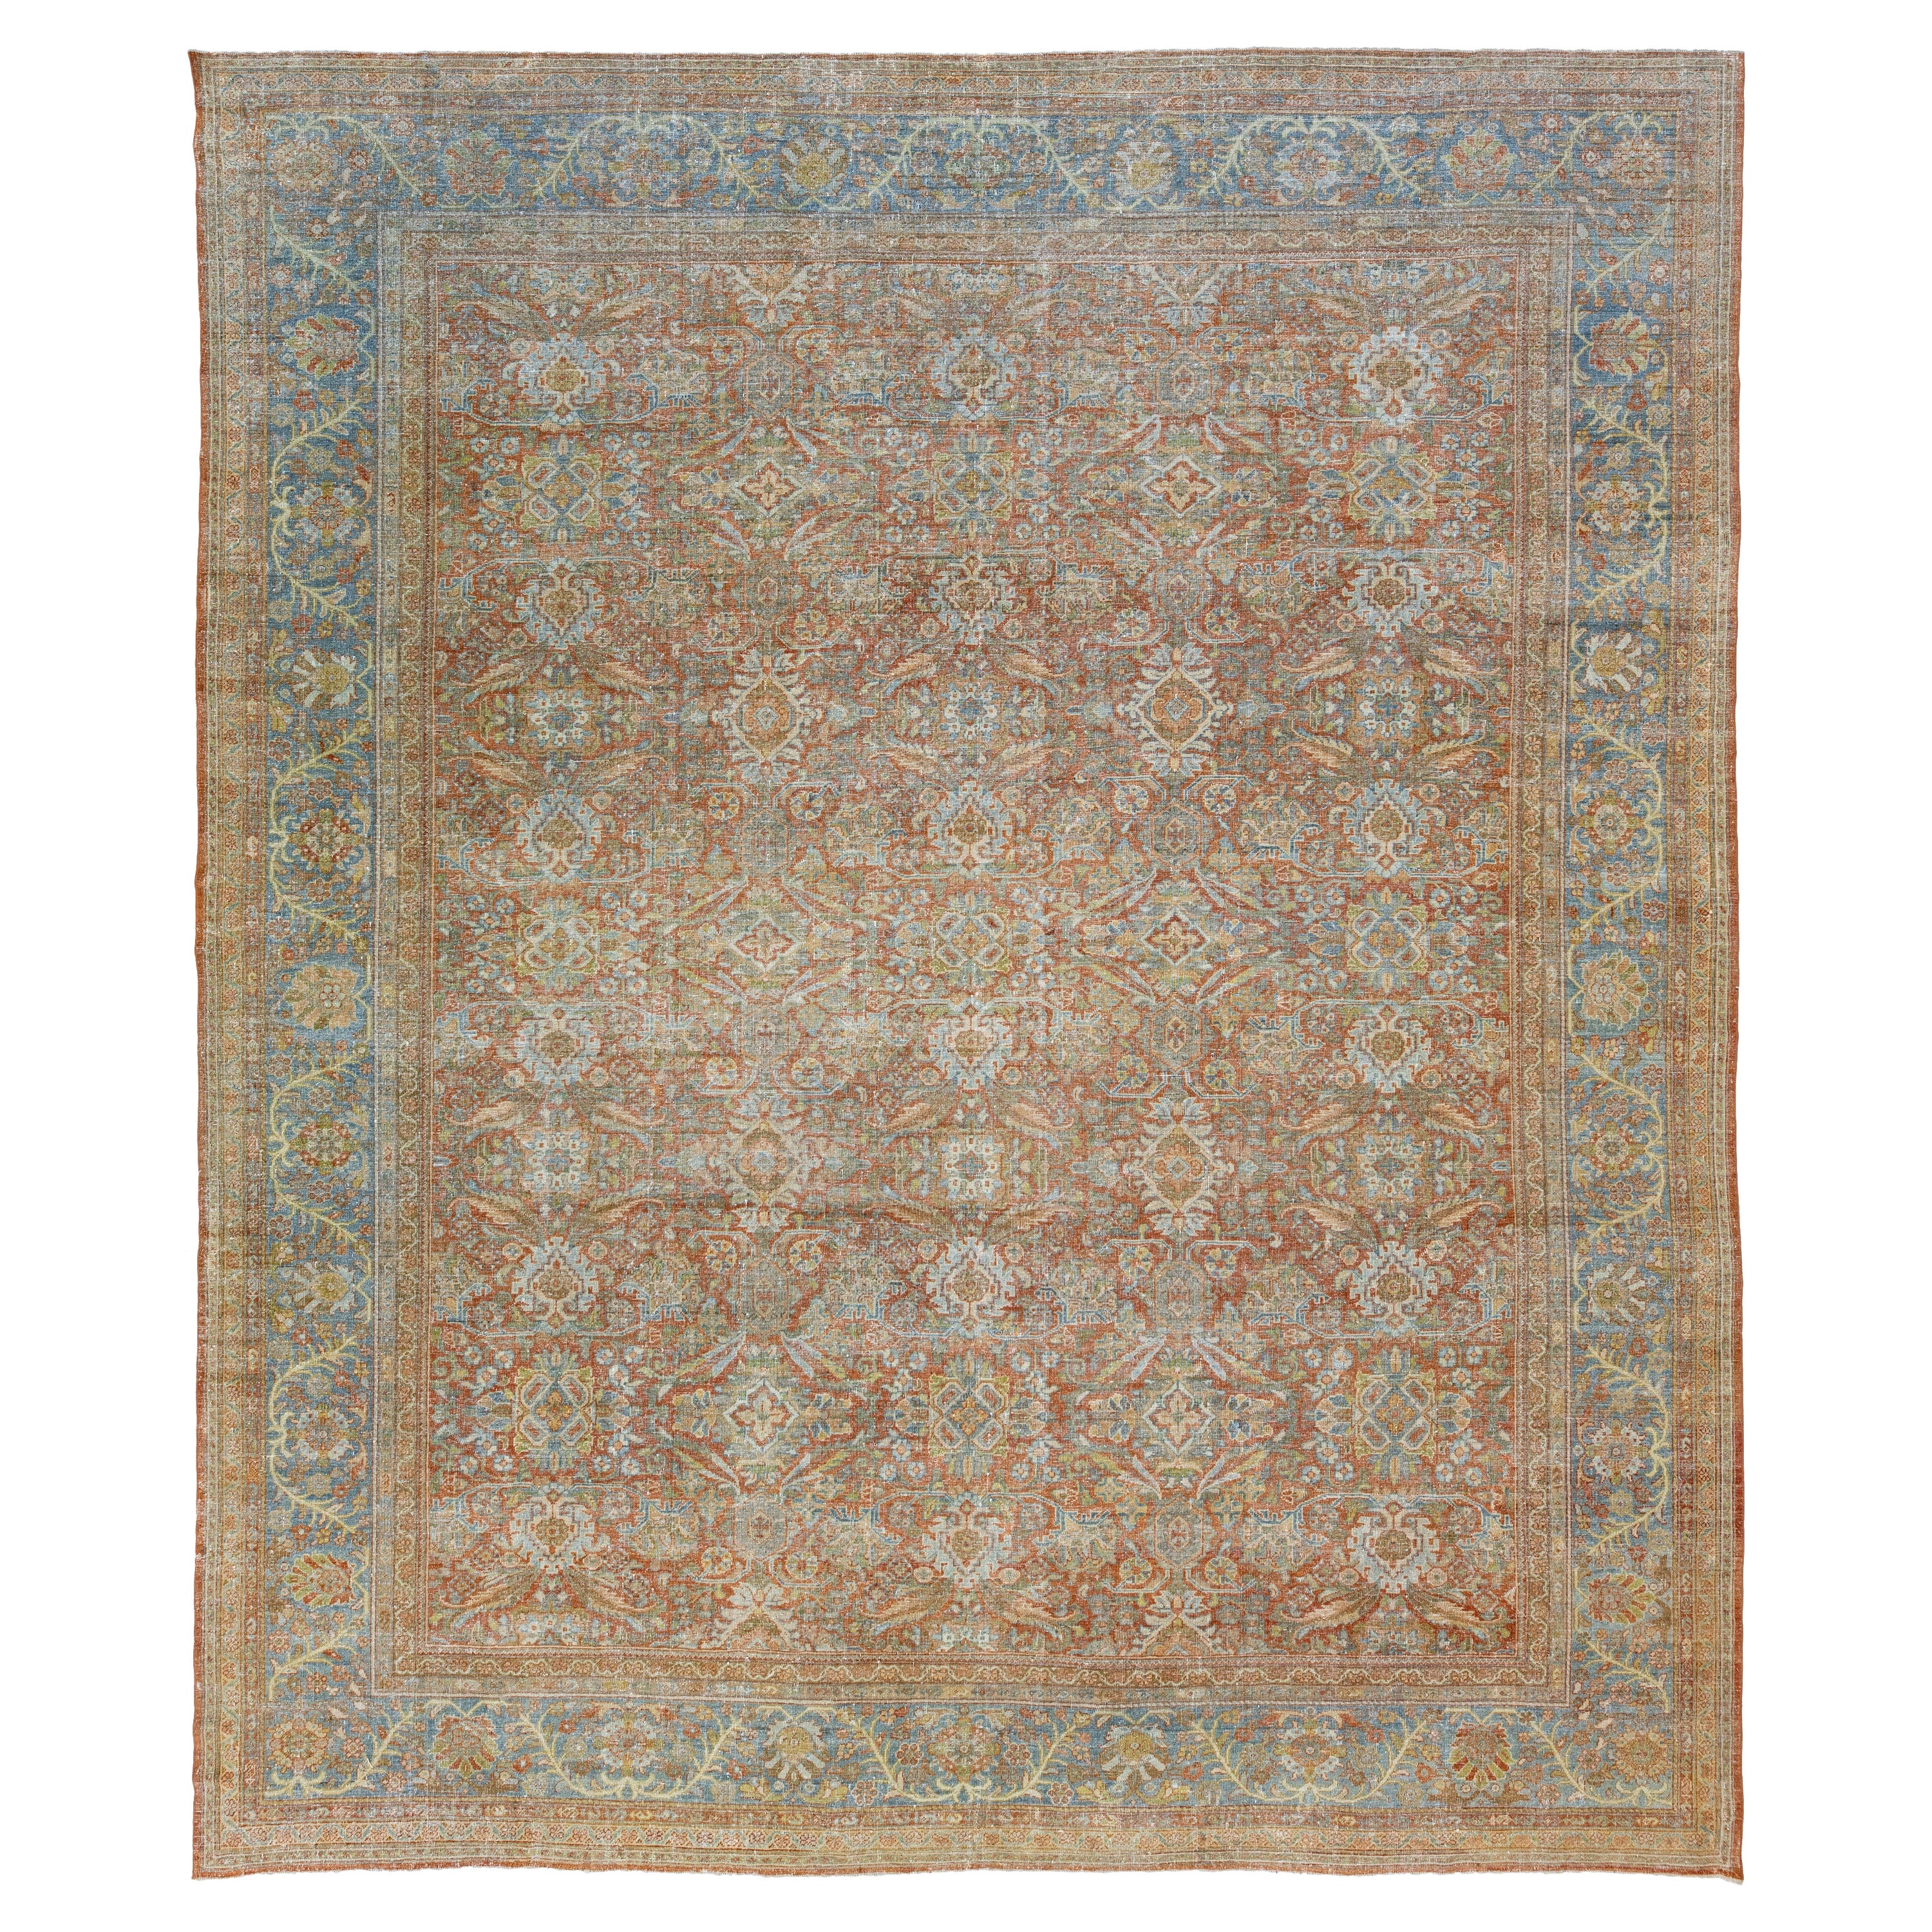 1900s Antique Persian Mahal Rust Wool Rug With Allover Floral Pattern For Sale